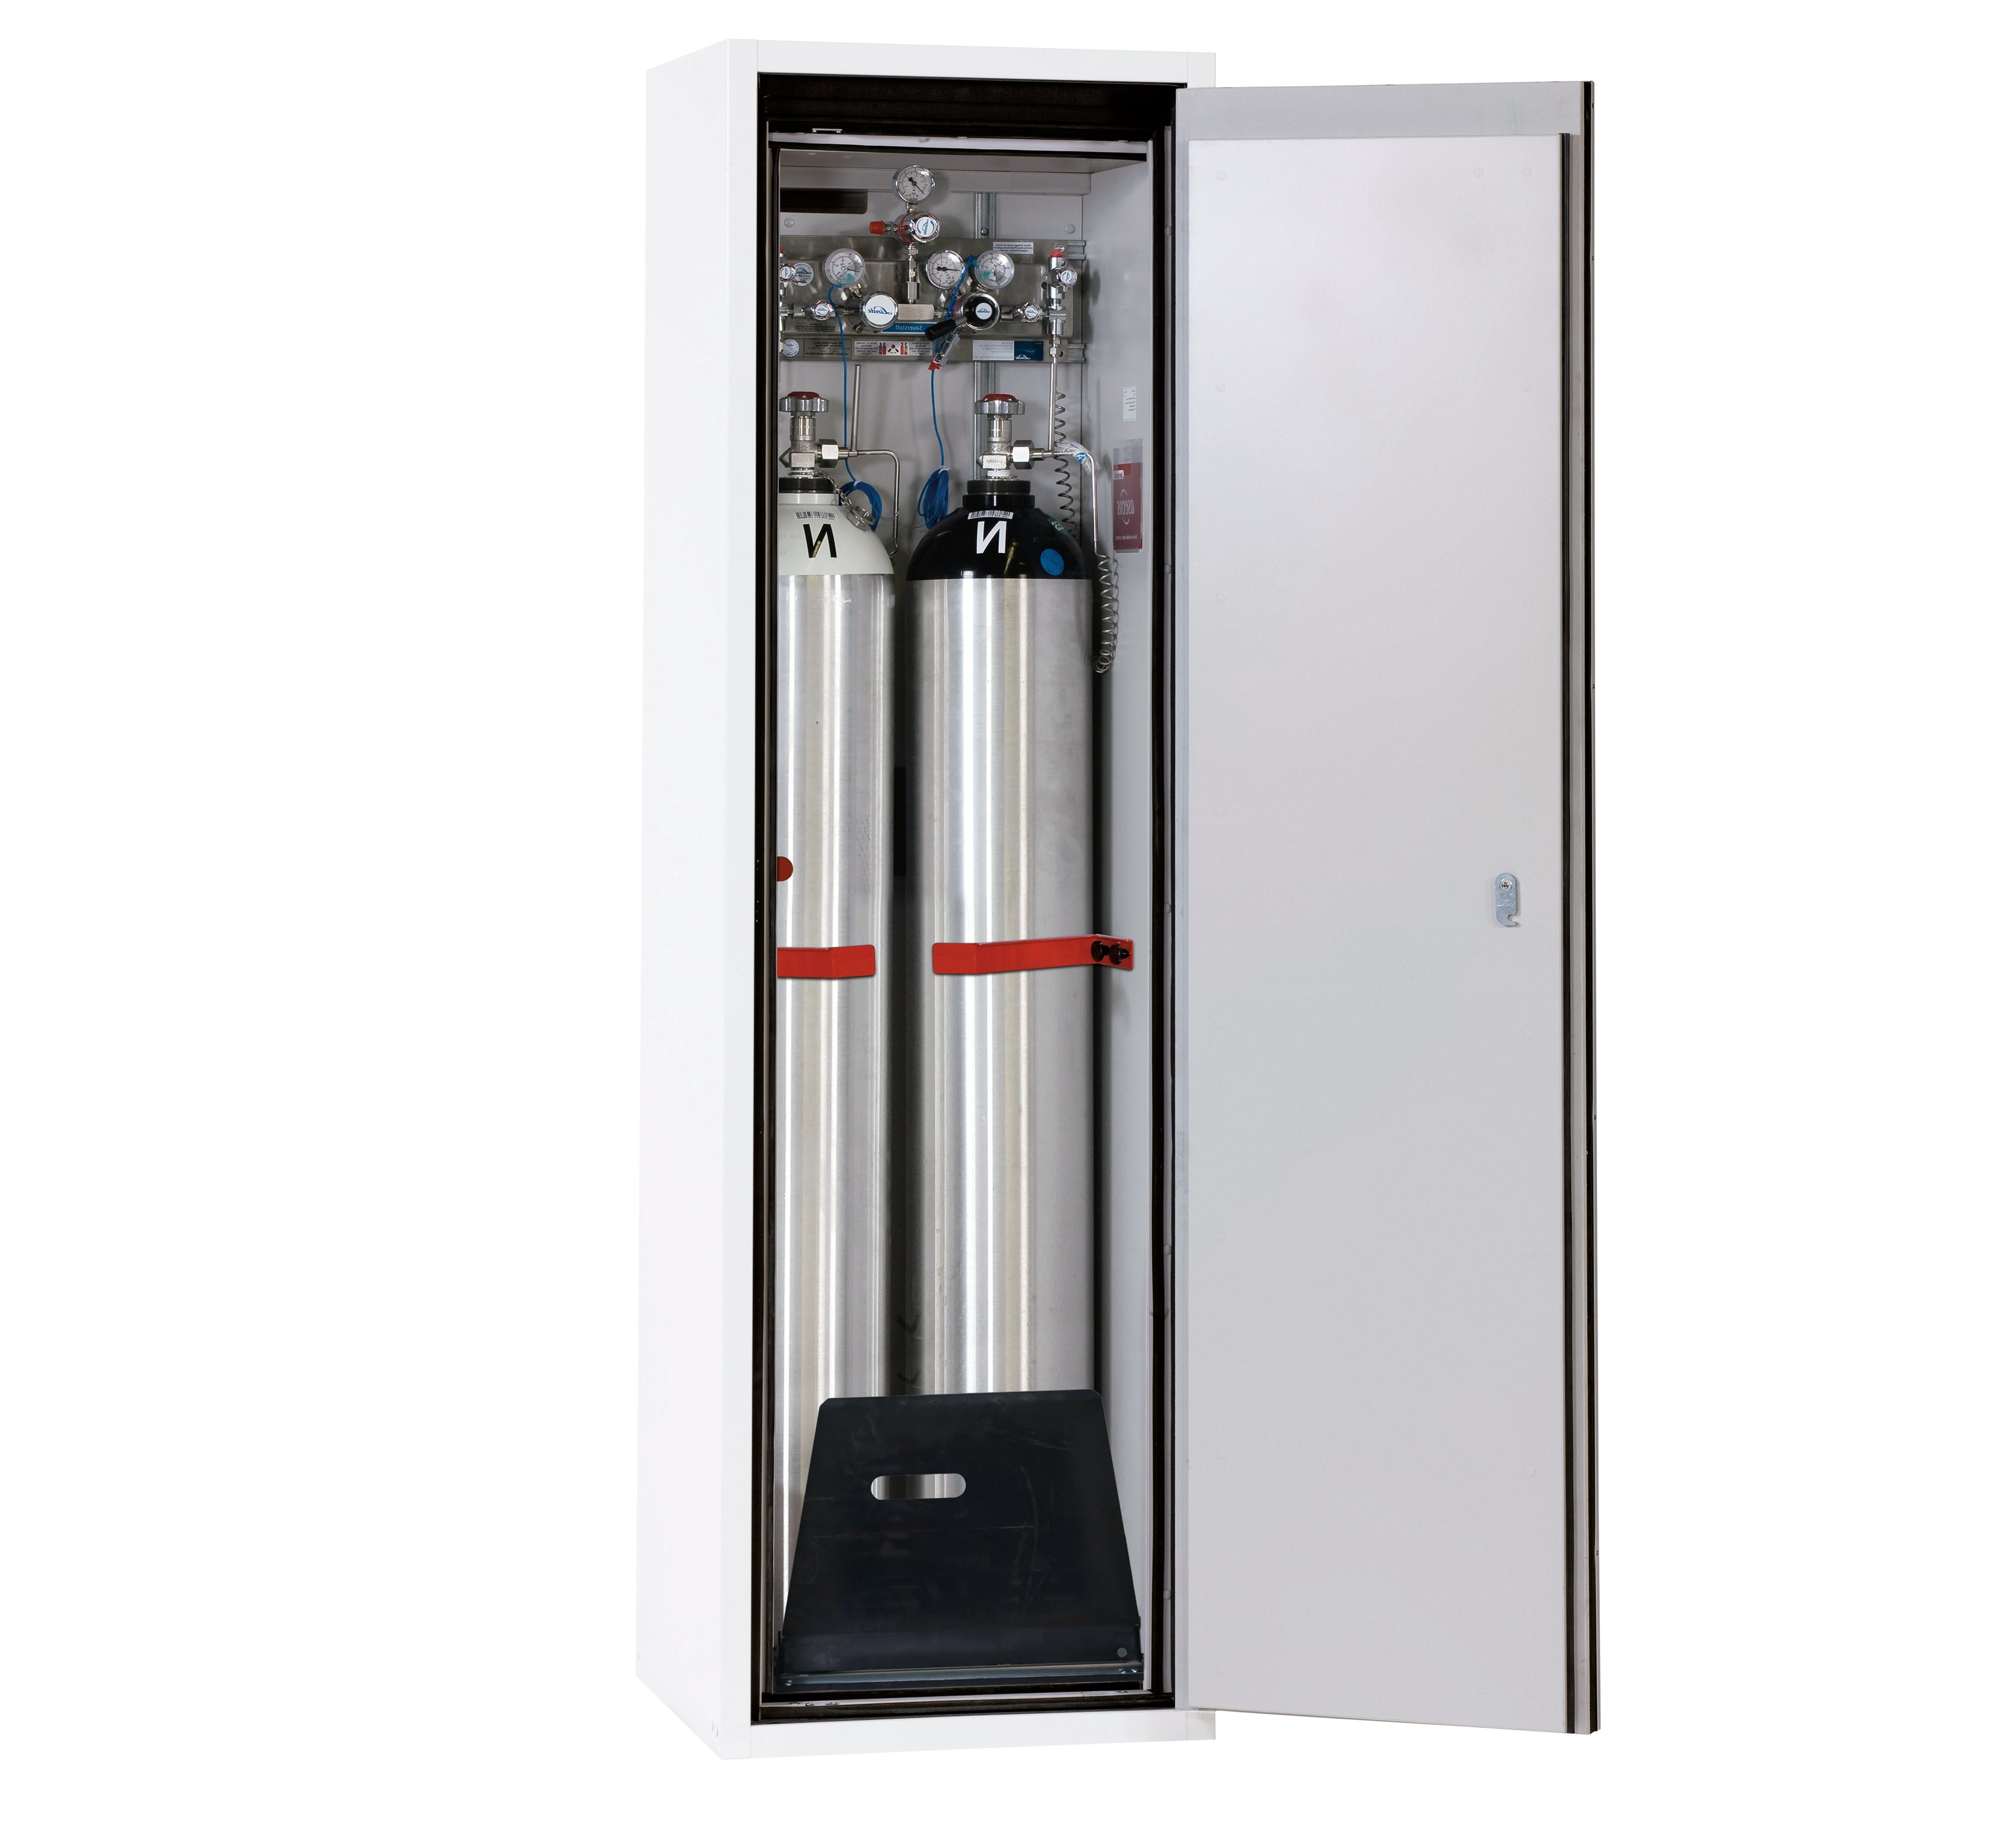 Type 90 compressed gas bottle cabinet G-ULTIMATE-90 model G90.205.060.2F.R in laboratory white (similar to RAL 9016) with standard interior fittings for 2x compressed gas bottles of 50 liters each